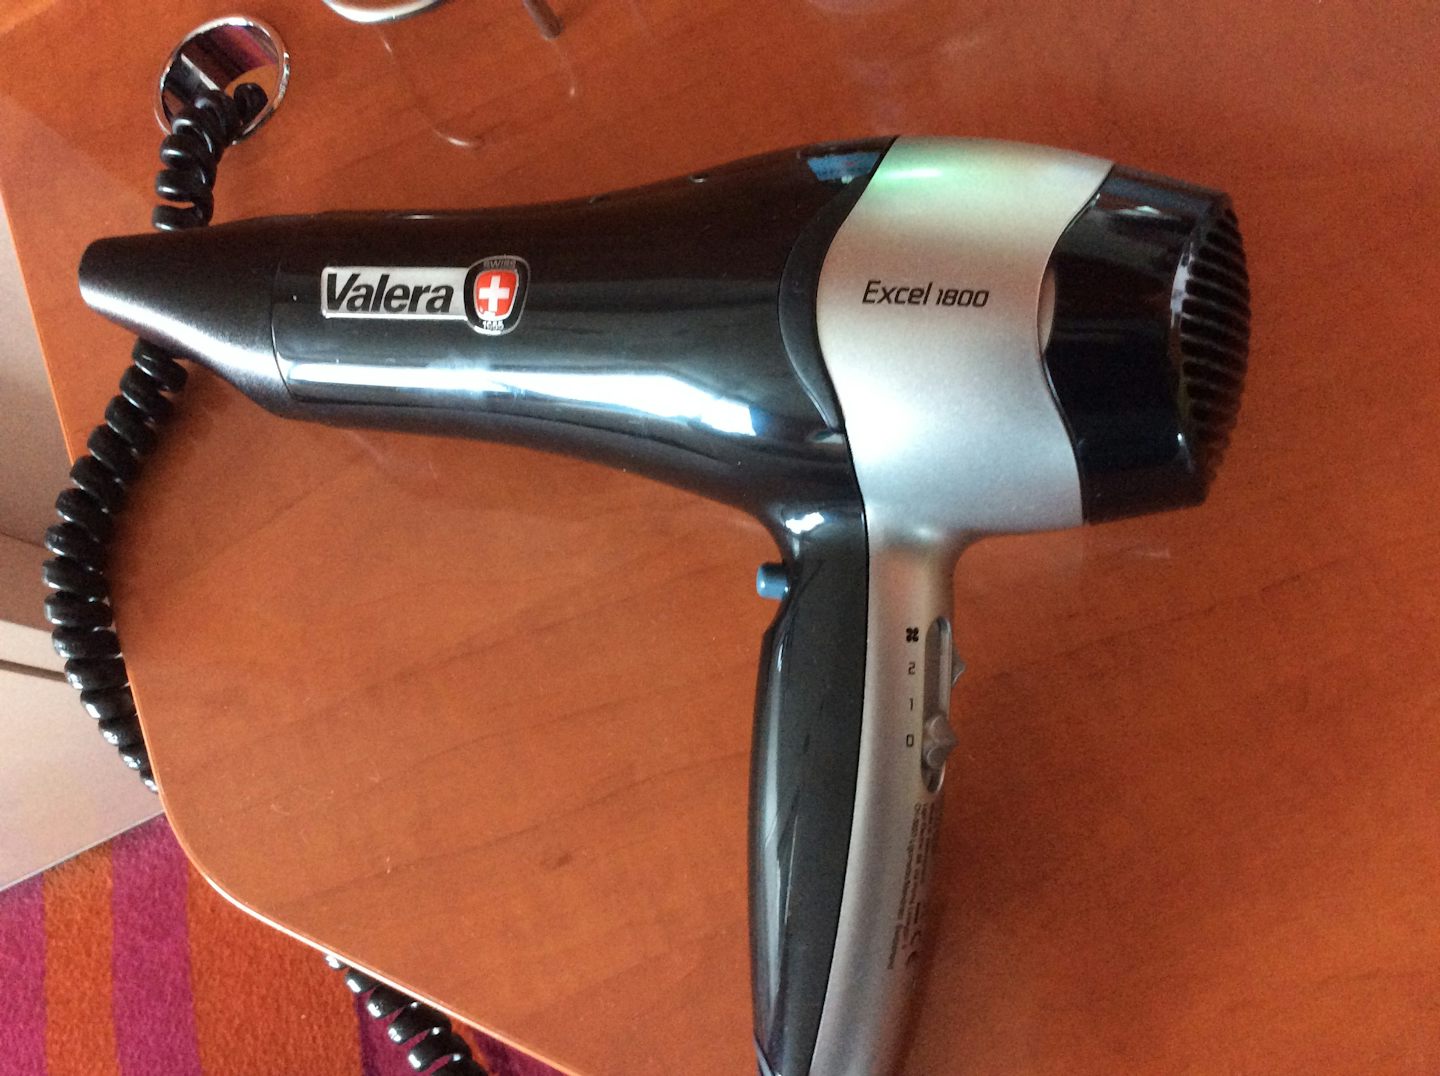 Hair dryer in our cabin